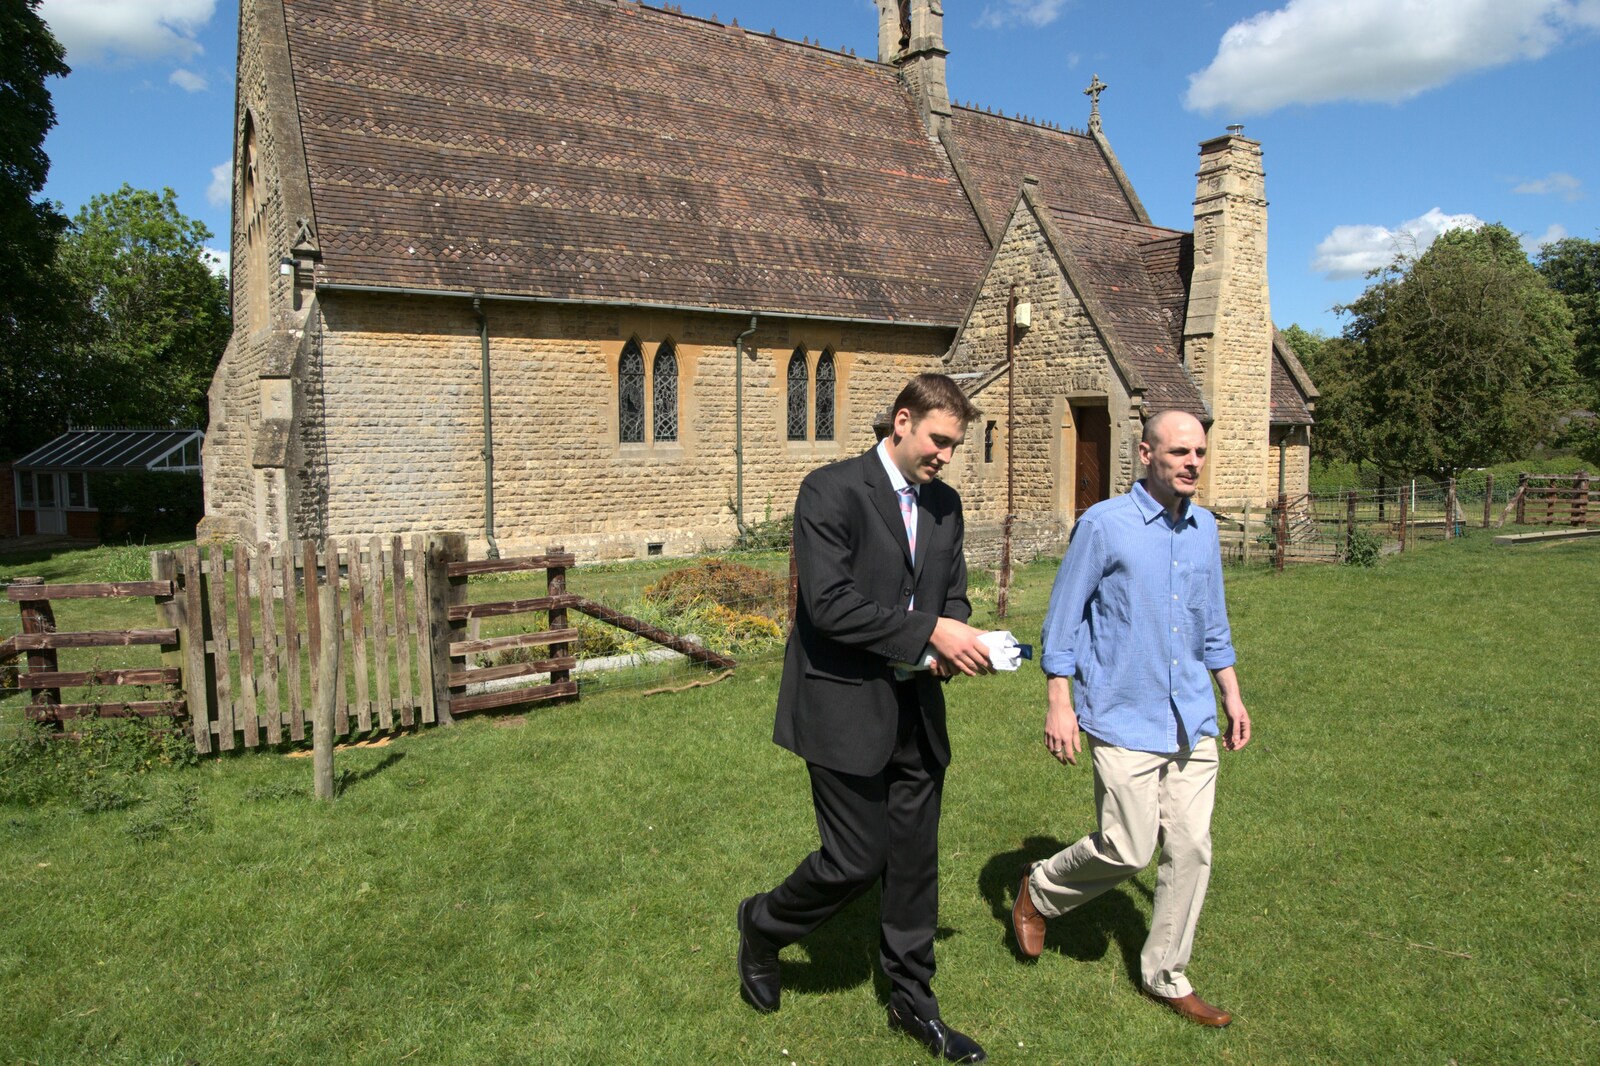 Stephen and Baz walk out from the chapel from A Christening, Wilford, Northamptonshire - 22nd May 2011